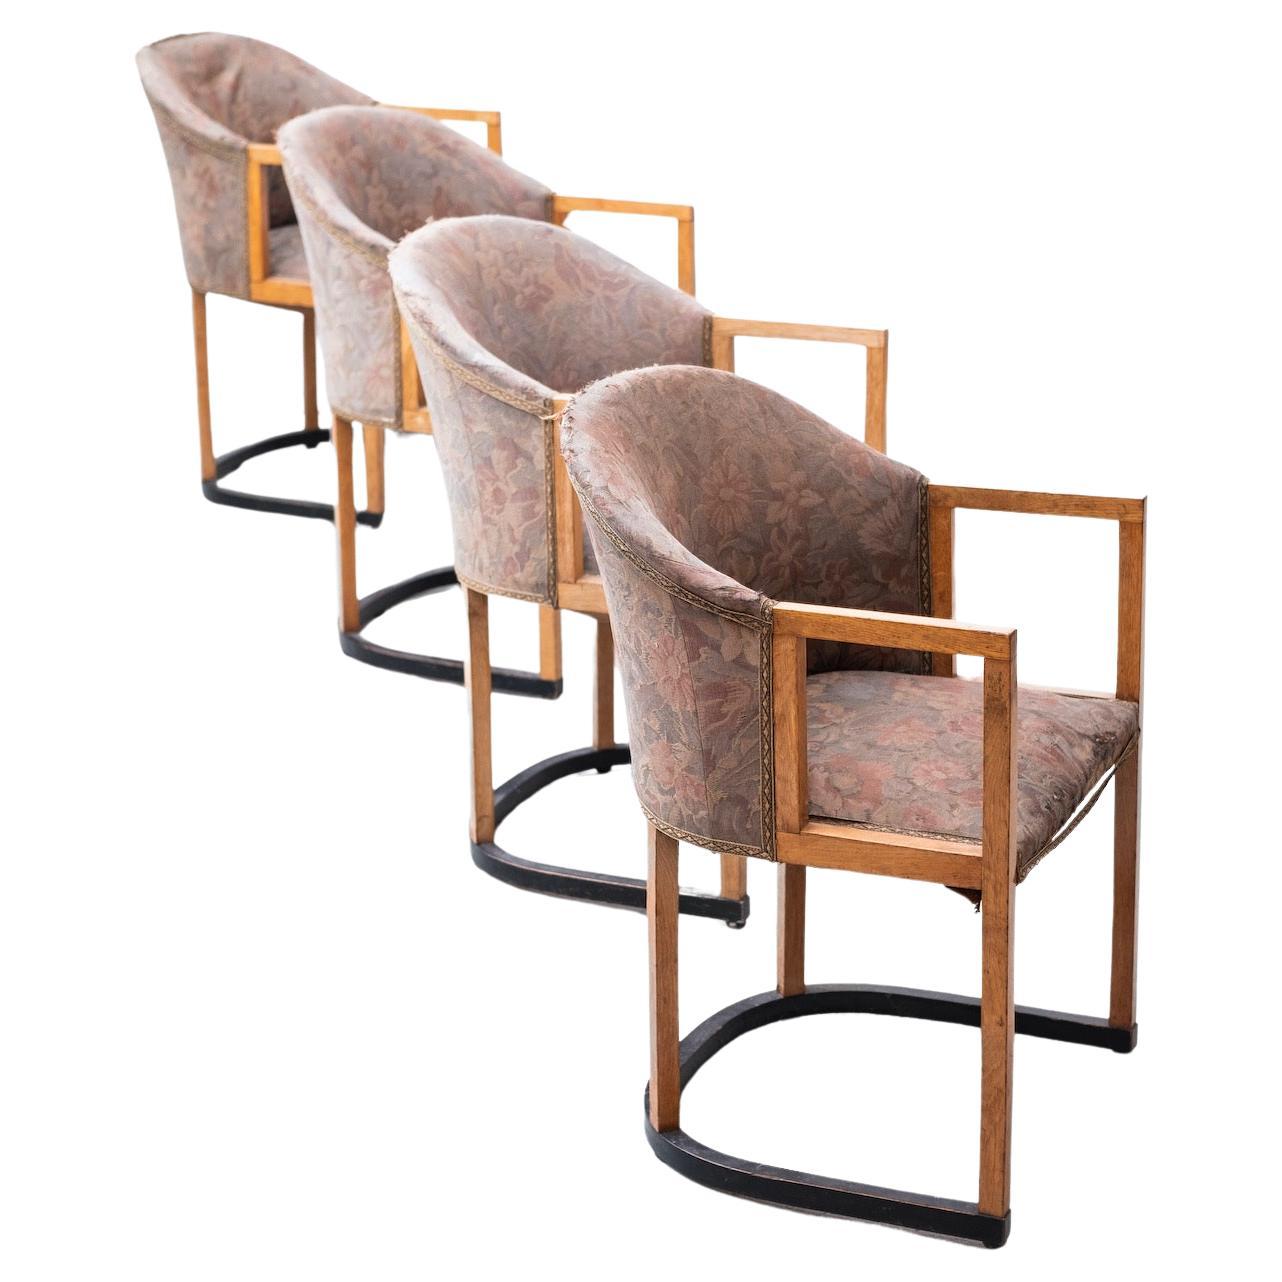 4 secessionistic armchairs by Wilhelm Schmidt (Student J. Hoffmann), Vienna 1908 For Sale